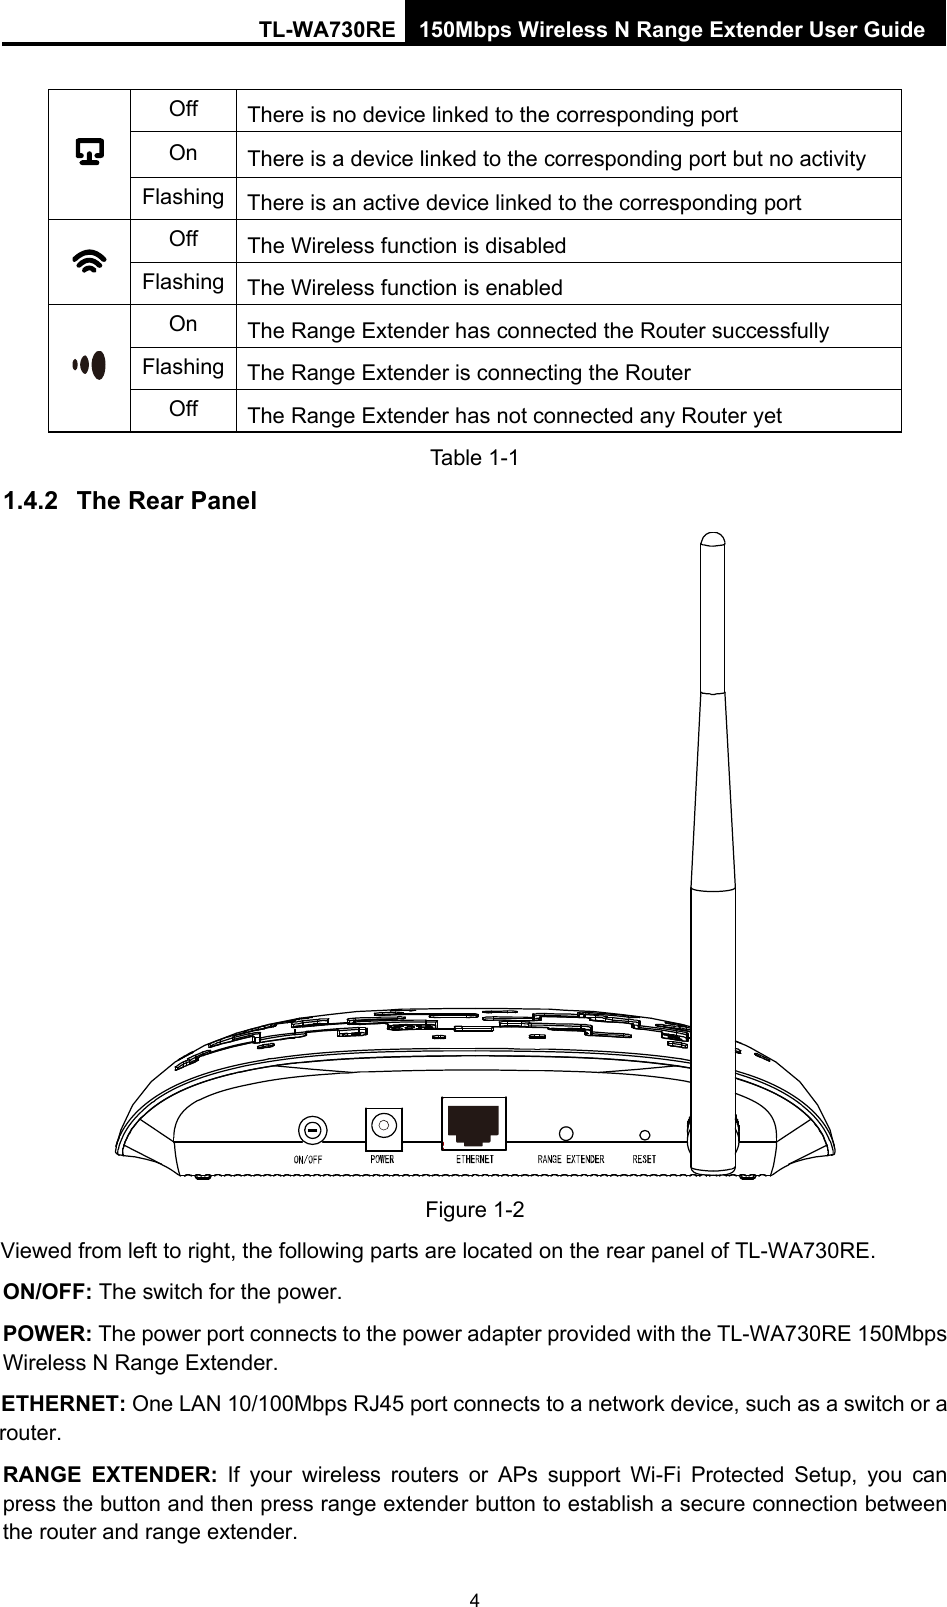 TL-WA730RE 150Mbps Wireless N Range Extender User Guide Off  There is no device linked to the corresponding port On  There is a device linked to the corresponding port but no activity  Flashing There is an active device linked to the corresponding port Off  The Wireless function is disabled  Flashing The Wireless function is enabled On  The Range Extender has connected the Router successfully Flashing The Range Extender is connecting the Router  Off  The Range Extender has not connected any Router yet Table 1-1 1.4.2  The Rear Panel  Figure 1-2 Viewed from left to right, the following parts are located on the rear panel of TL-WA730RE. ON/OFF: The switch for the power. POWER: The power port connects to the power adapter provided with the TL-WA730RE 150Mbps Wireless N Range Extender. ETHERNET: One LAN 10/100Mbps RJ45 port connects to a network device, such as a switch or a router. RANGE EXTENDER: If your wireless routers or APs support Wi-Fi Protected Setup, you can press the button and then press range extender button to establish a secure connection between the router and range extender. 4 